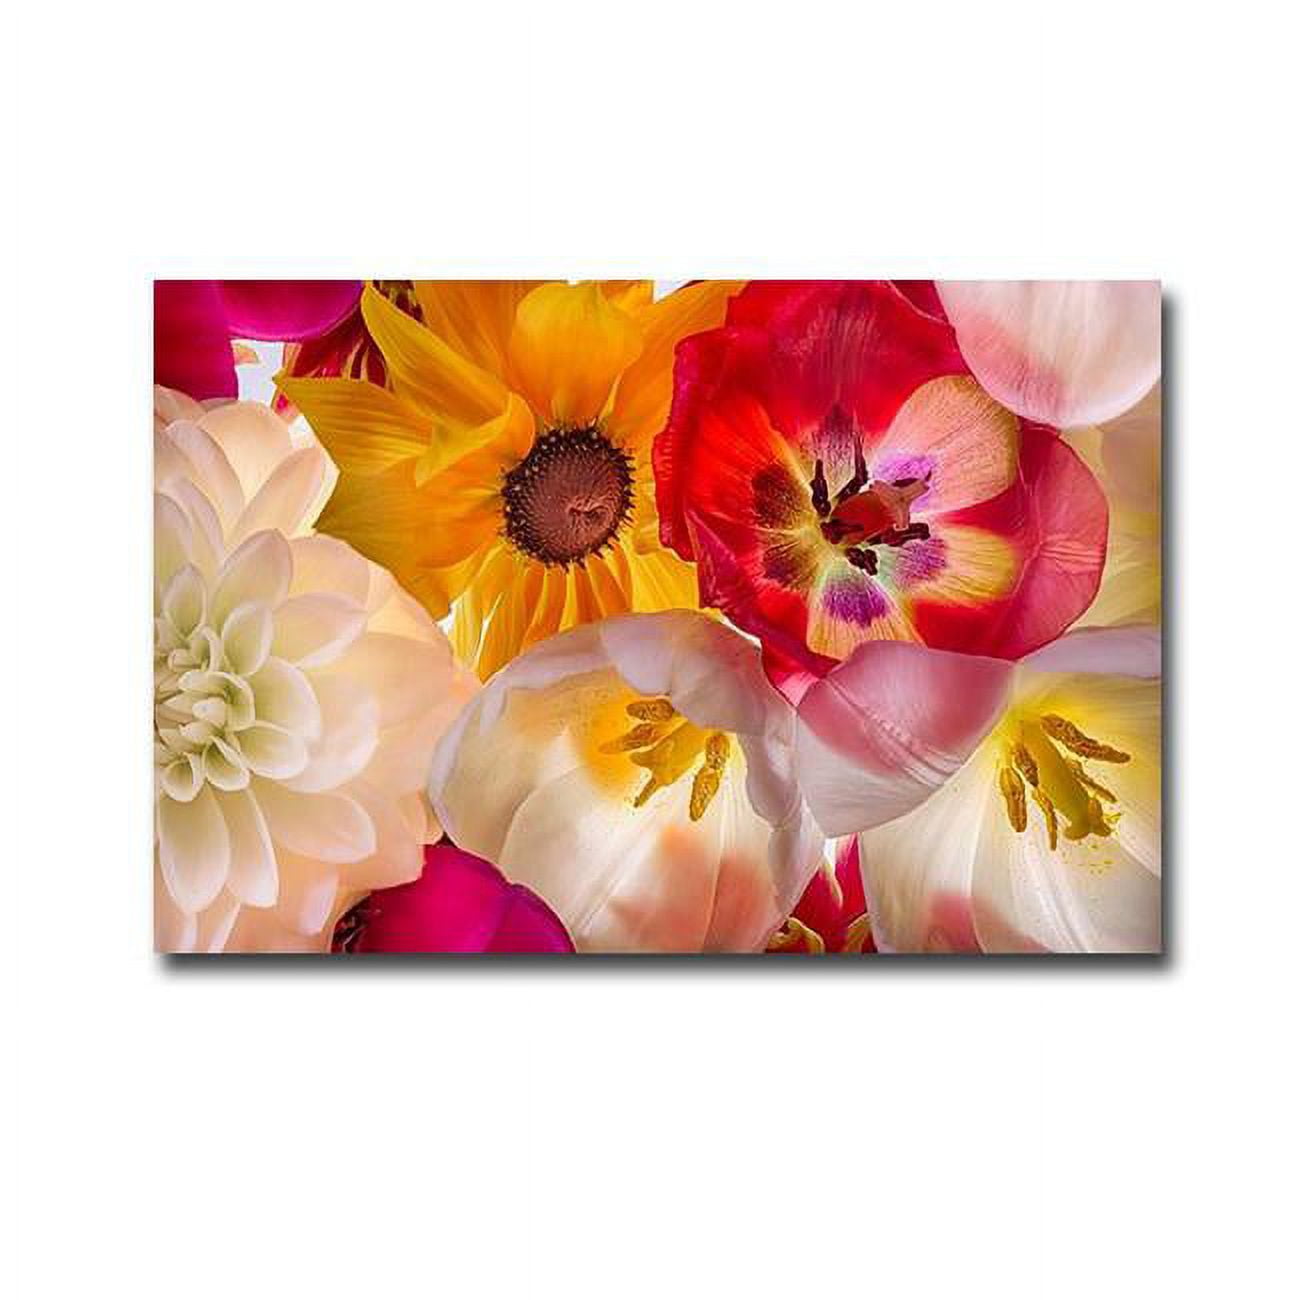 3045a729eg When Flowers Talk By Harold Davis Premium Oversize Gallery Wrapped Canvas Giclee Art - 30 X 45 X 1.5 In.